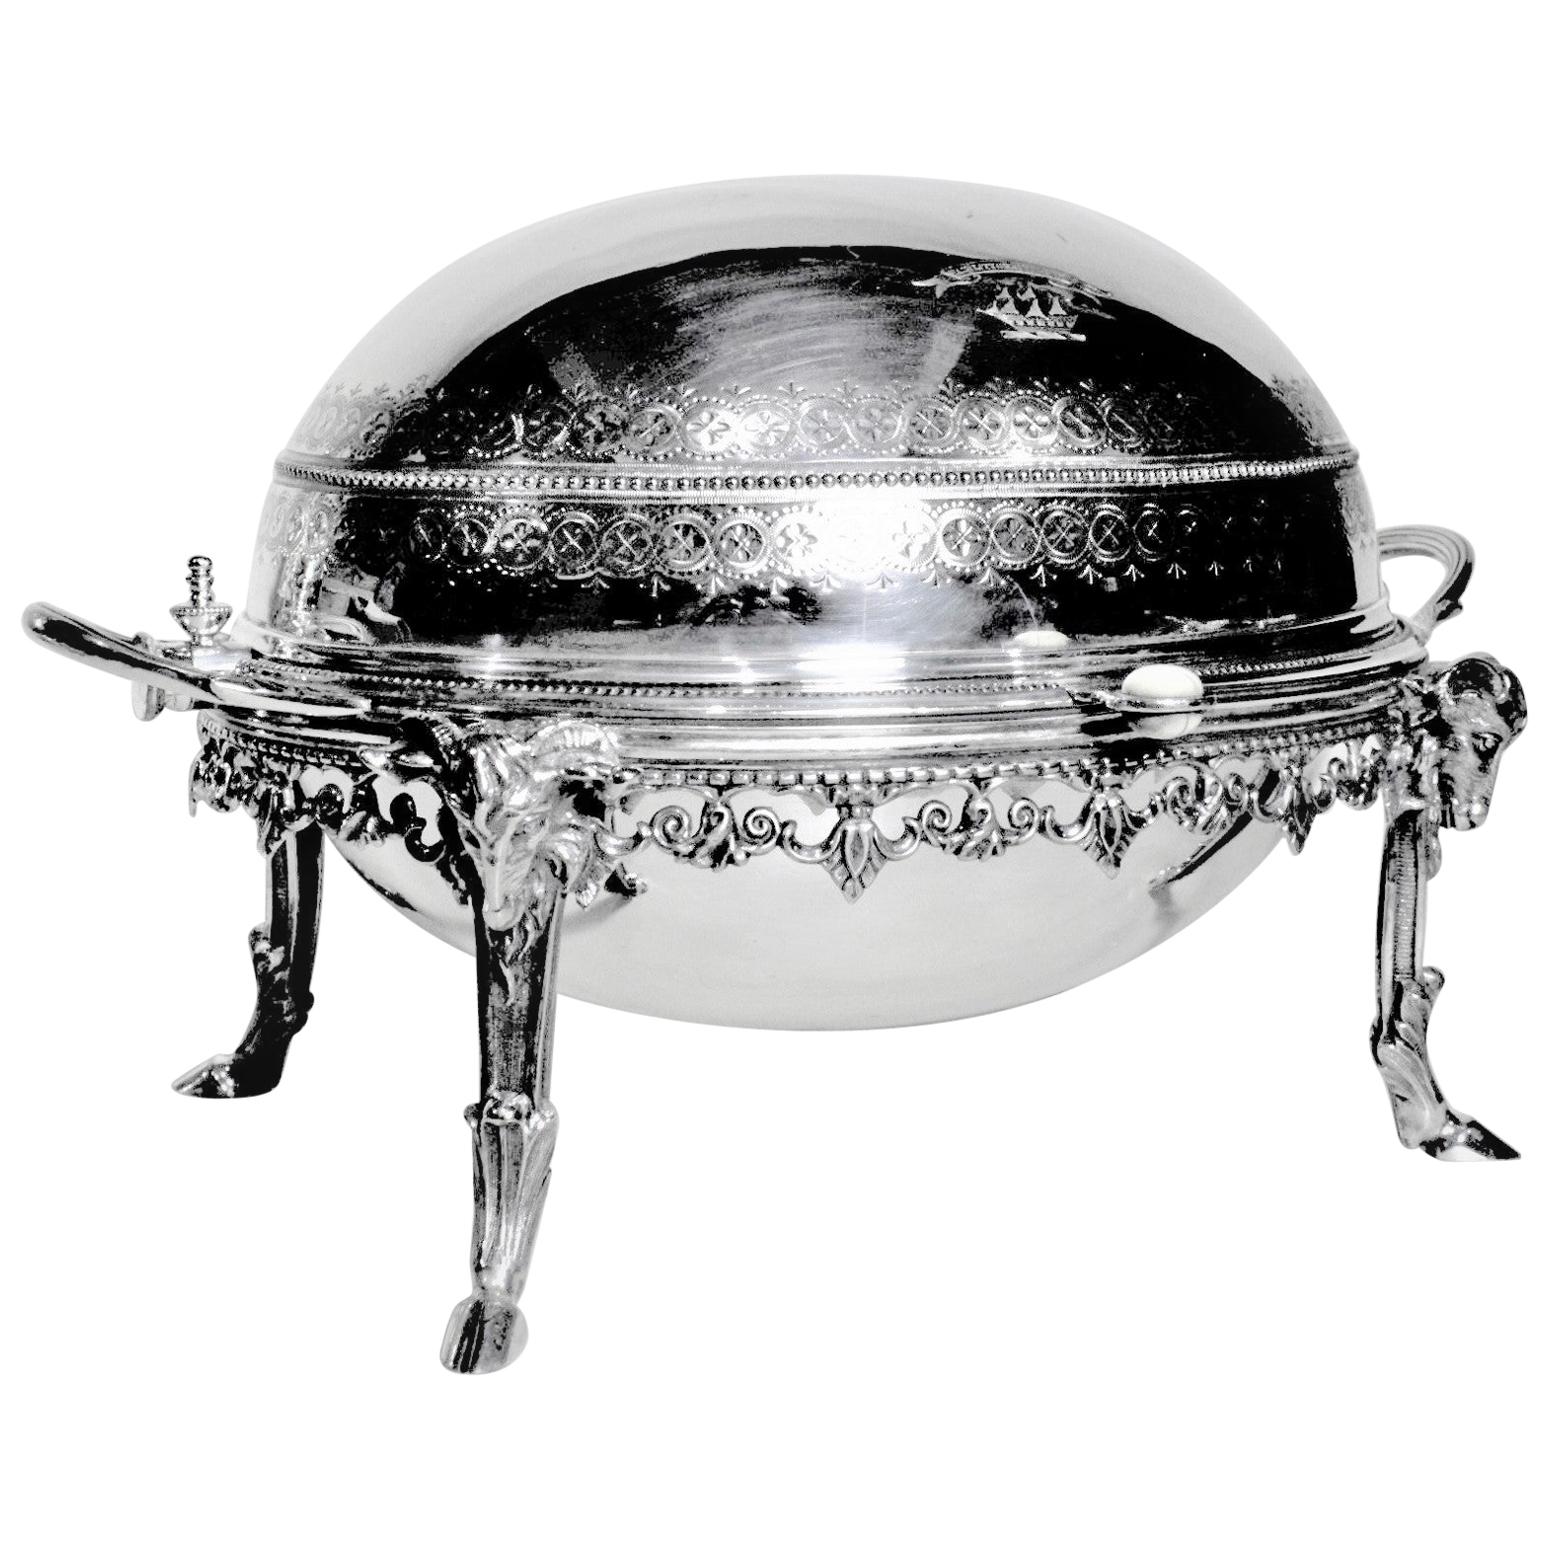 Antique English Silver Plated Revolving Breakfast Dome with Figural Ram Accents For Sale